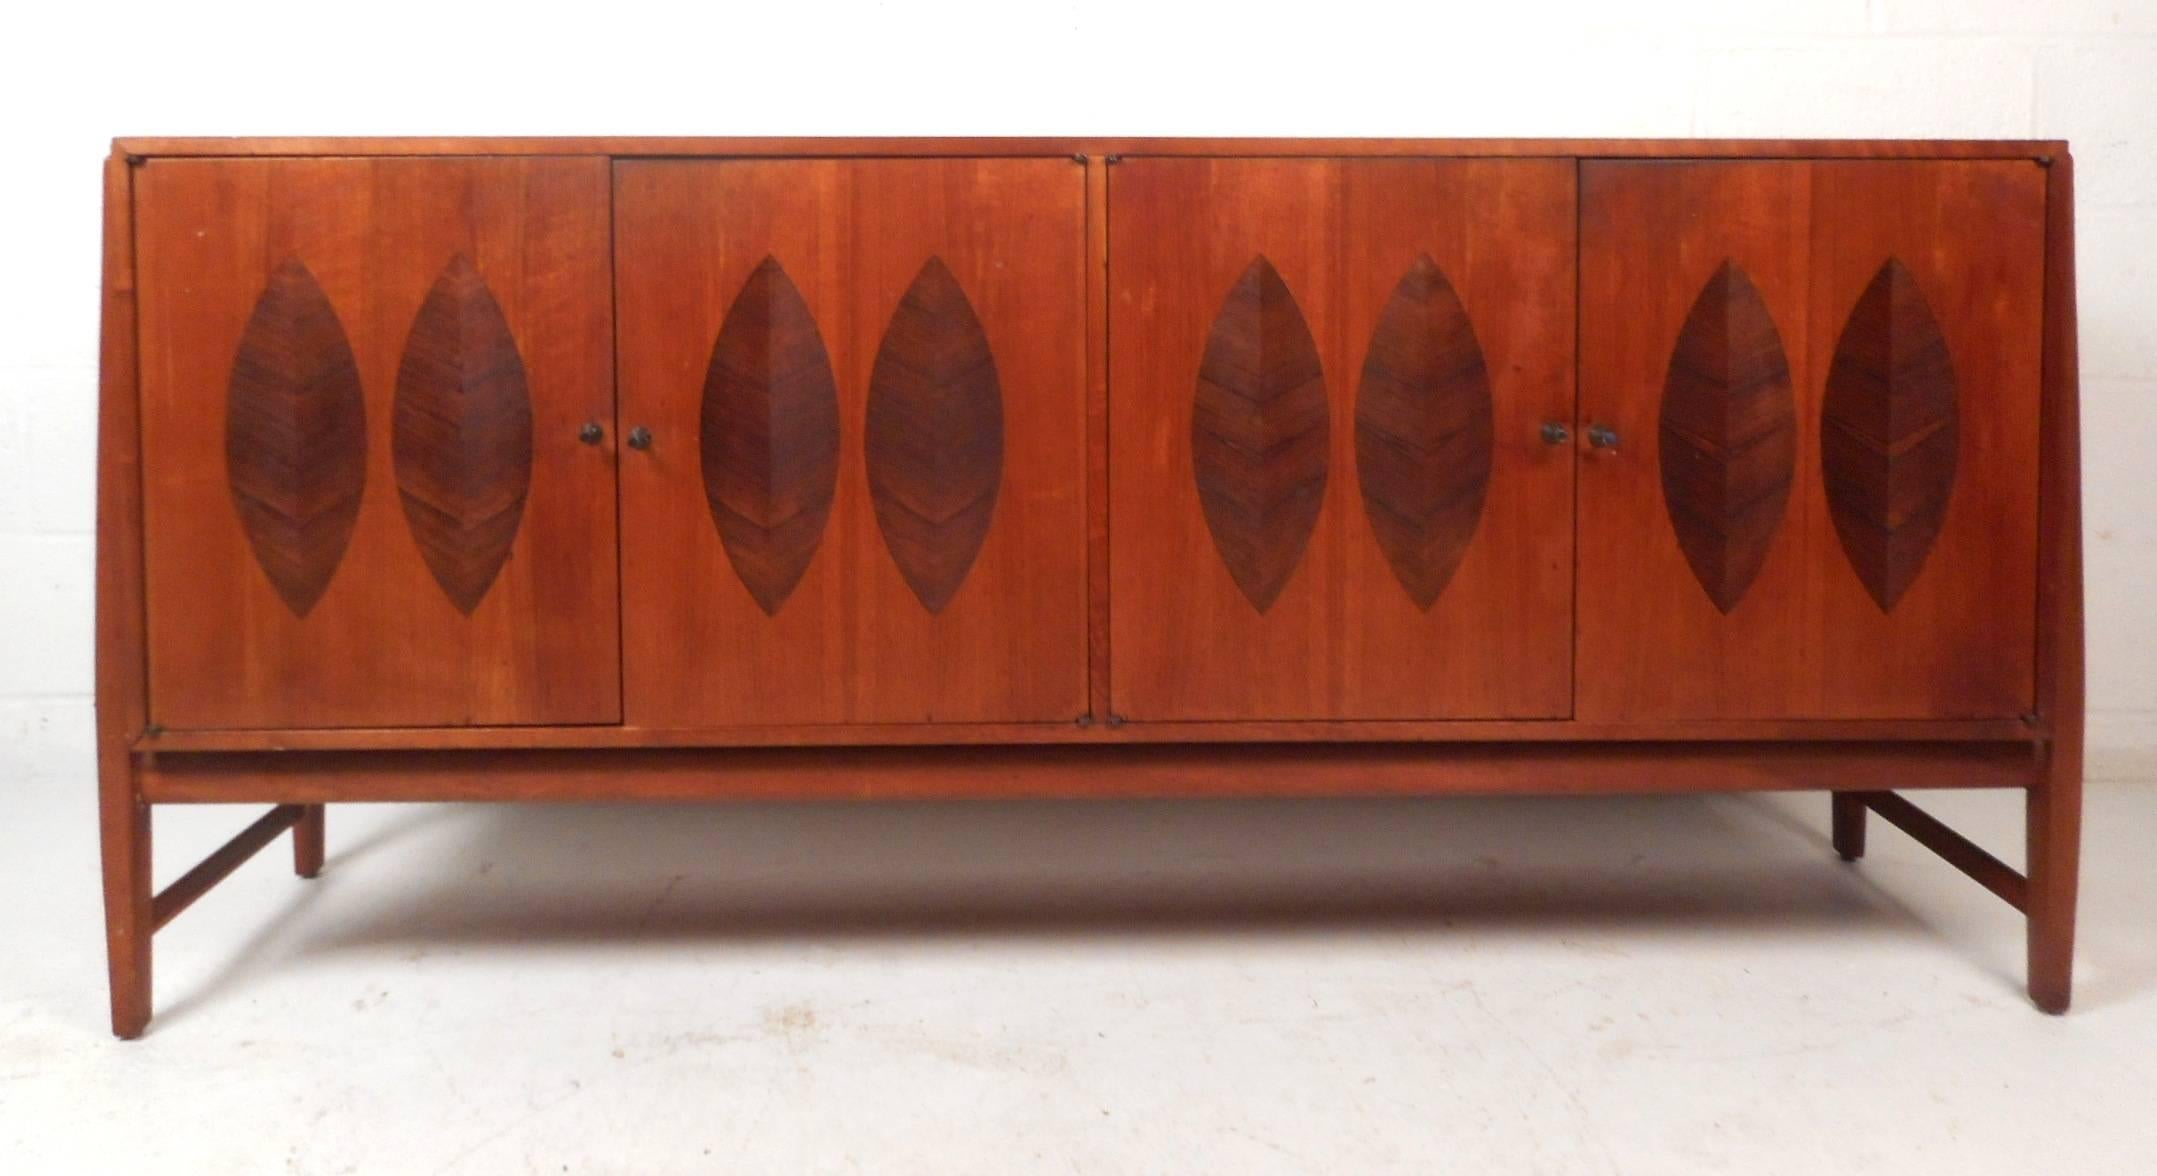 This amazing vintage modern sideboard features unique rosewood leaf inlays on the front of each cabinet door. Sleek design offers plenty of hidden storage space in its large compartments with drawers and a shelf. This lovely case piece has sculpted